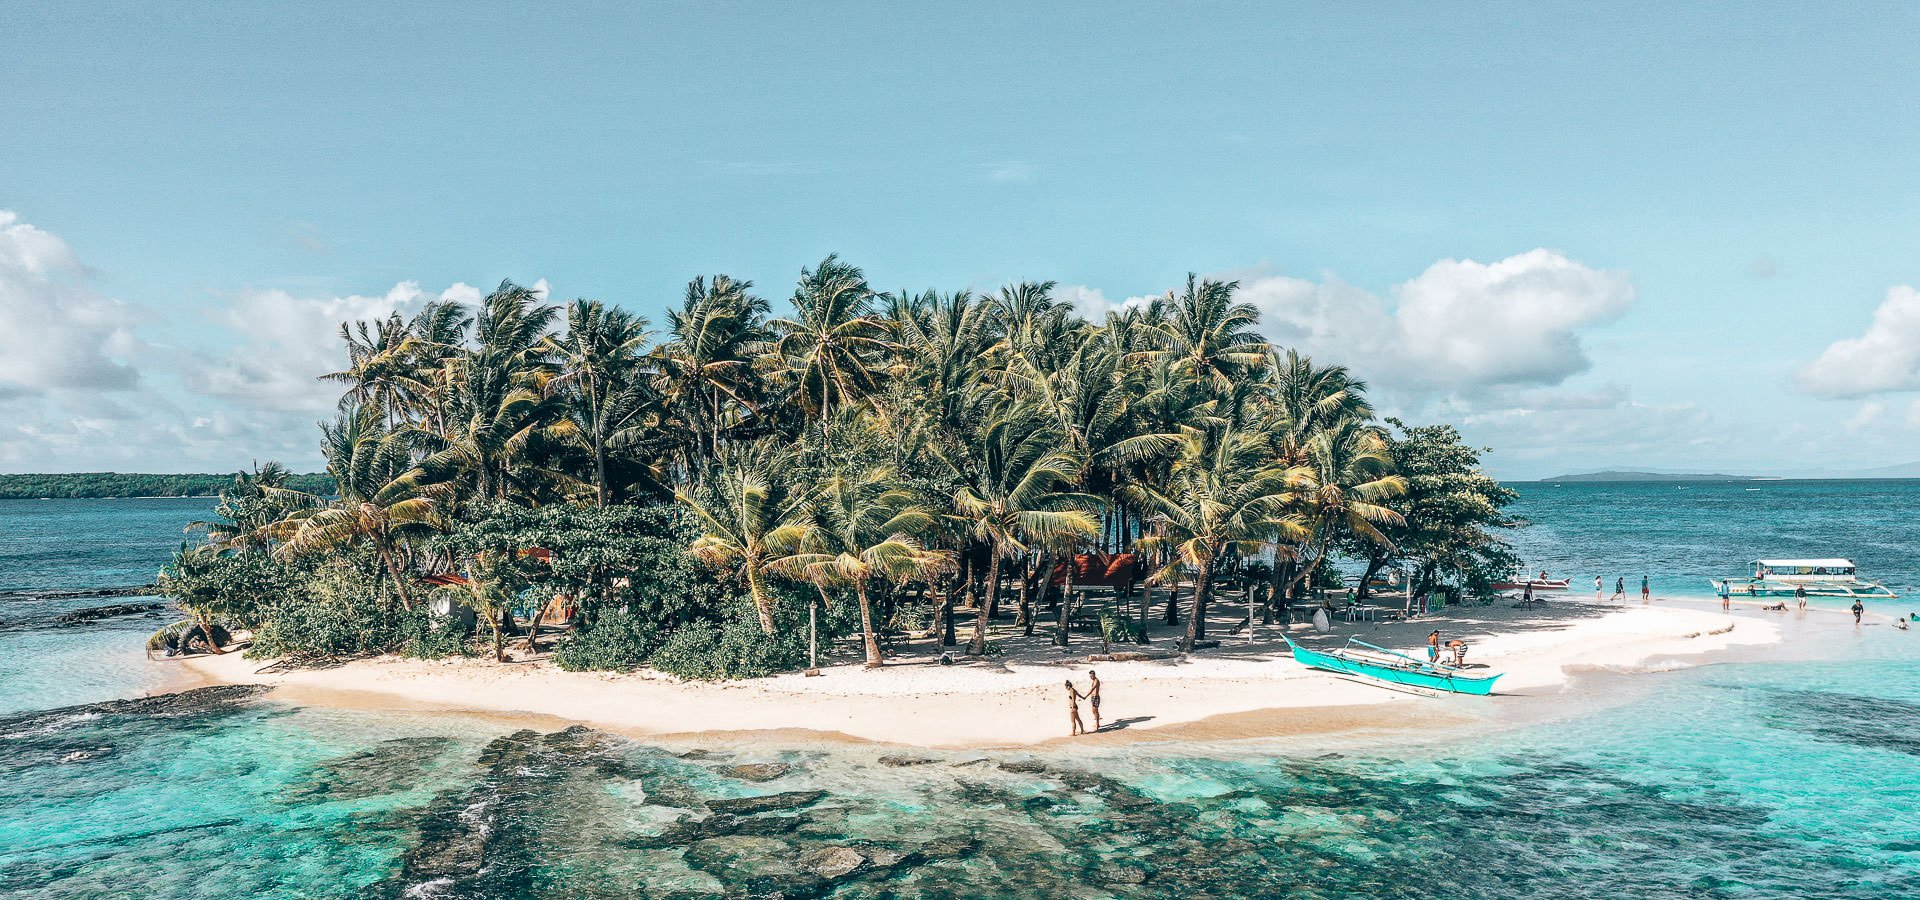 Siargao Itinerary And Expenses | island hopping in the philippines 3